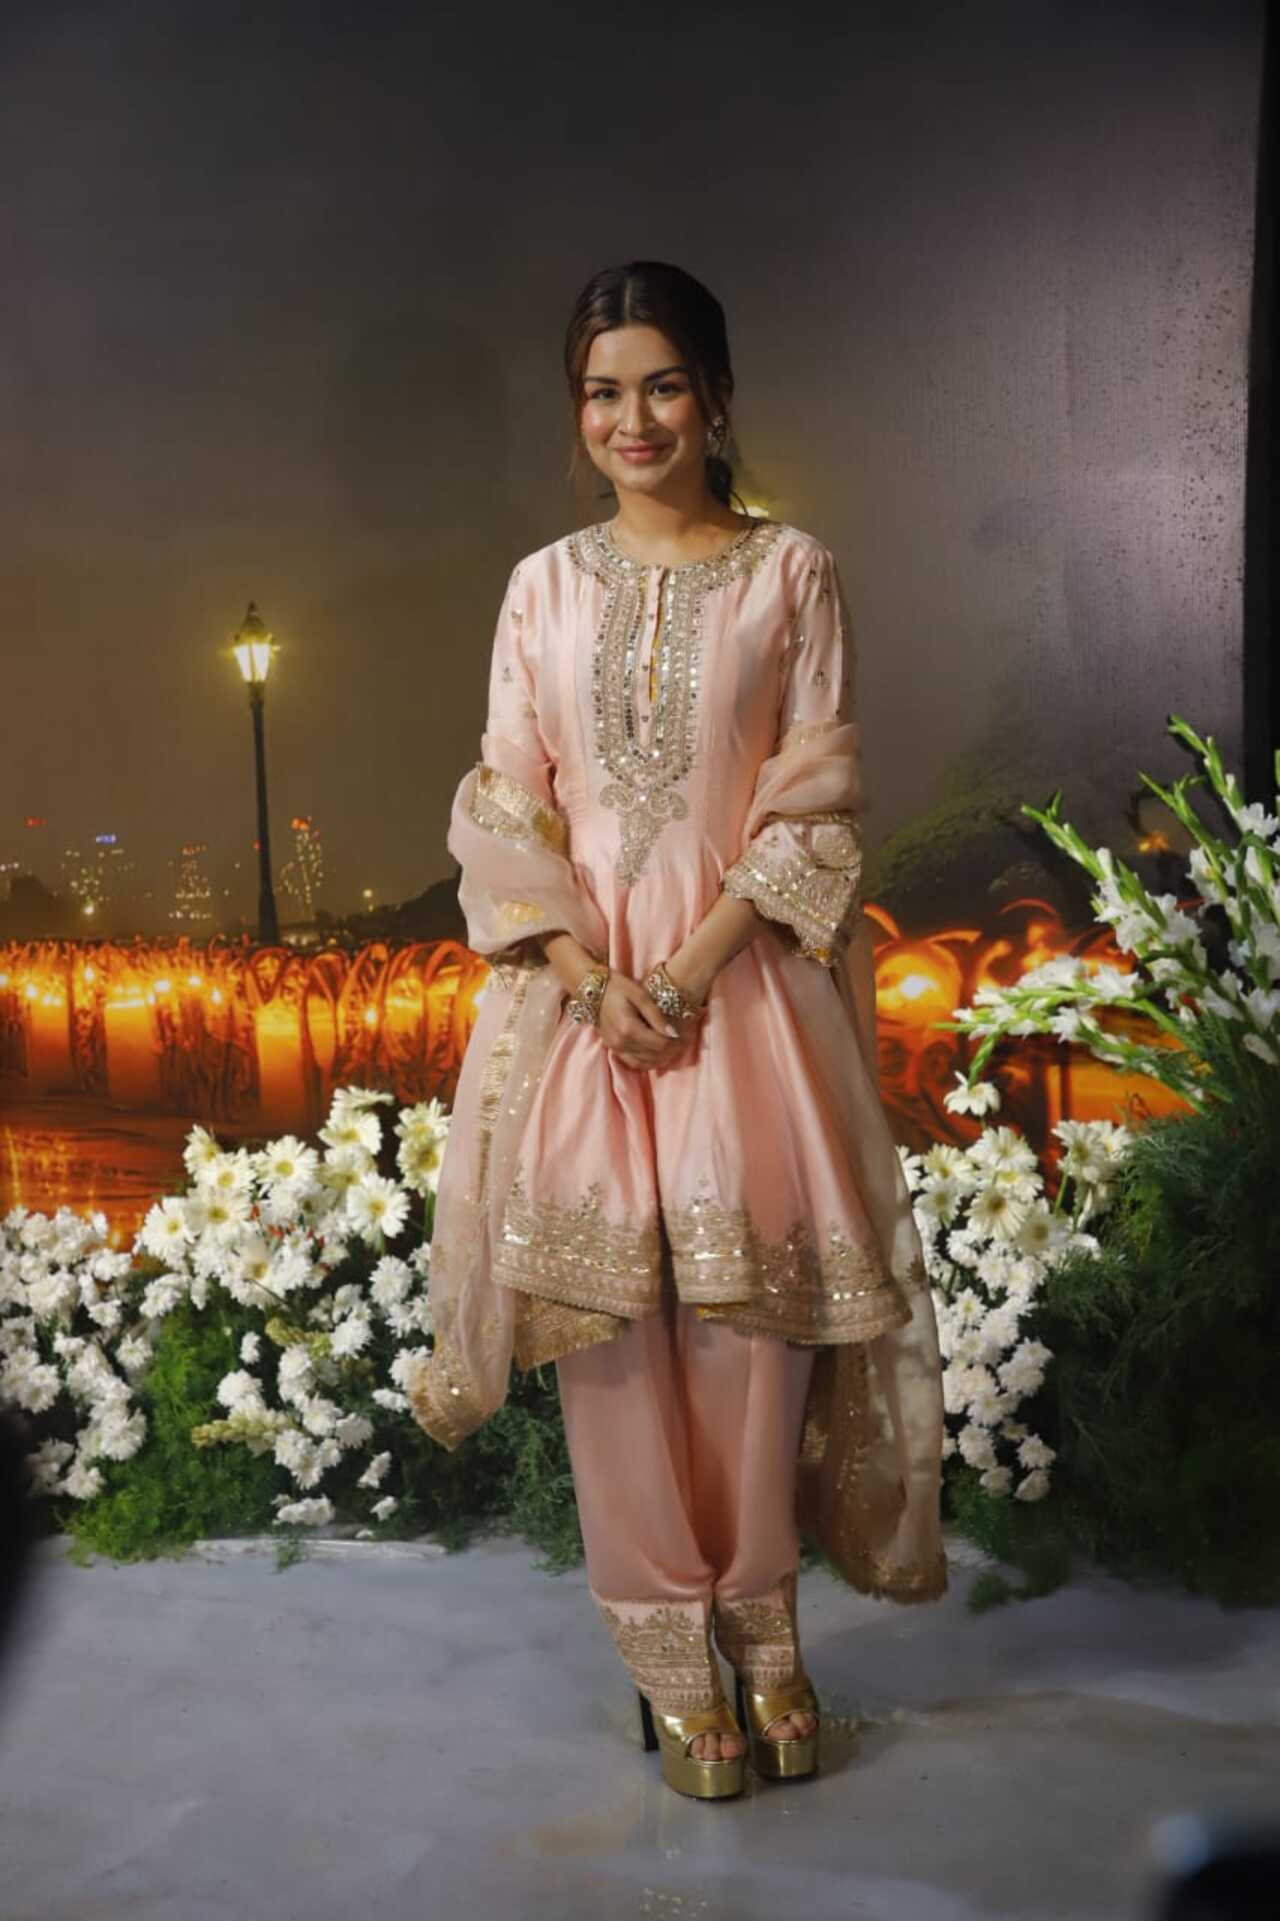 Avneet Kaur arrived in a baby pink suit